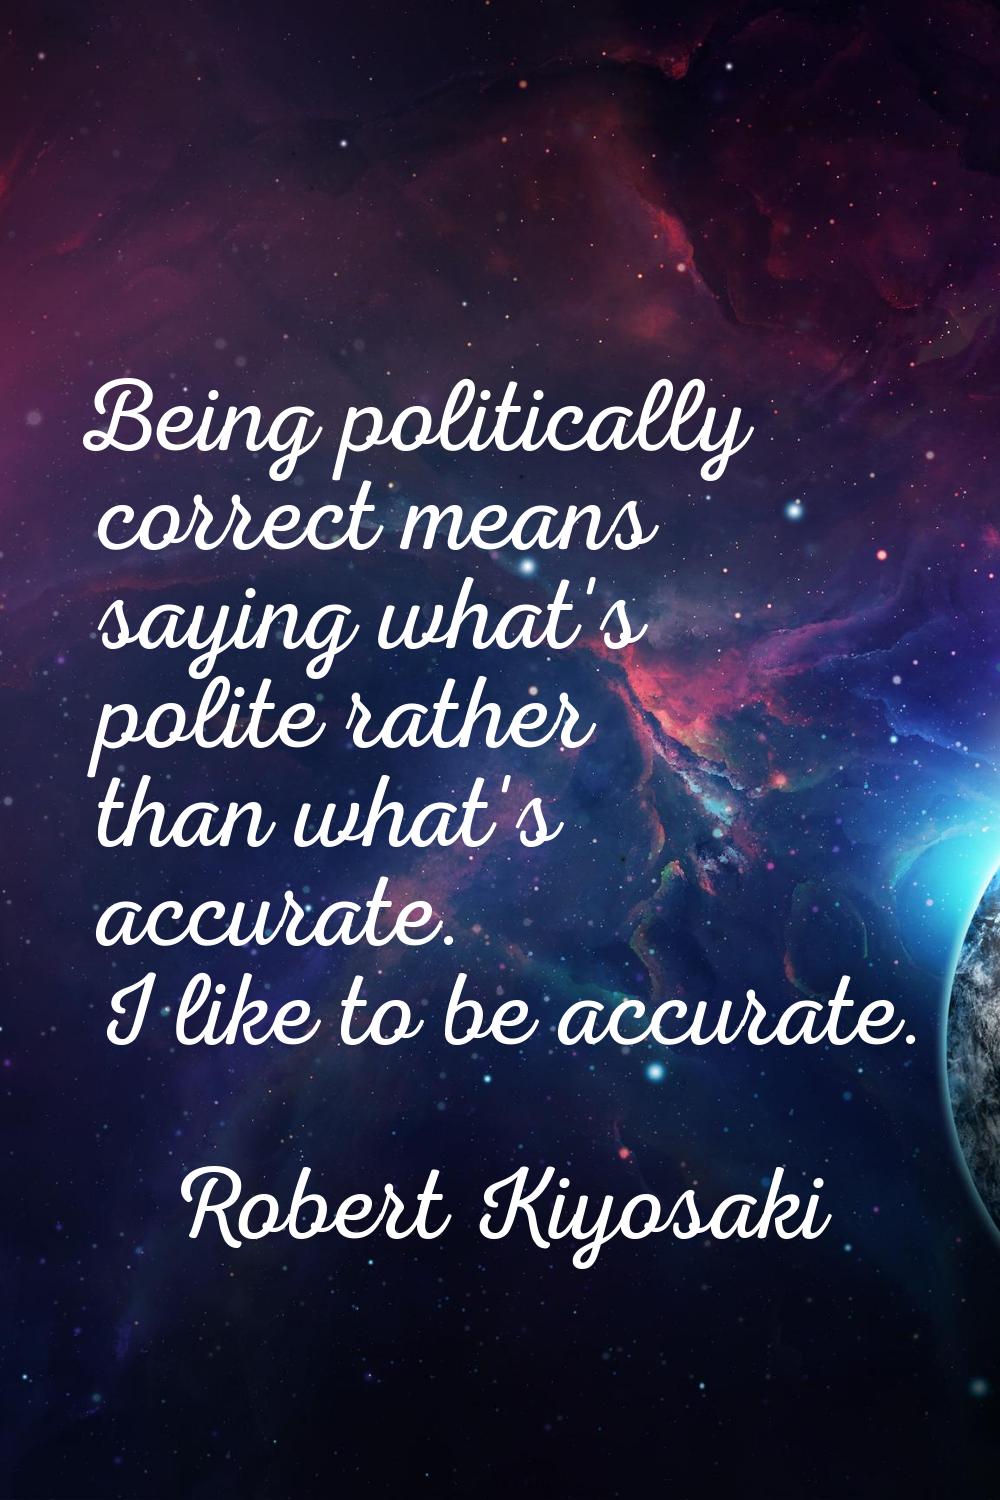 Being politically correct means saying what's polite rather than what's accurate. I like to be accu